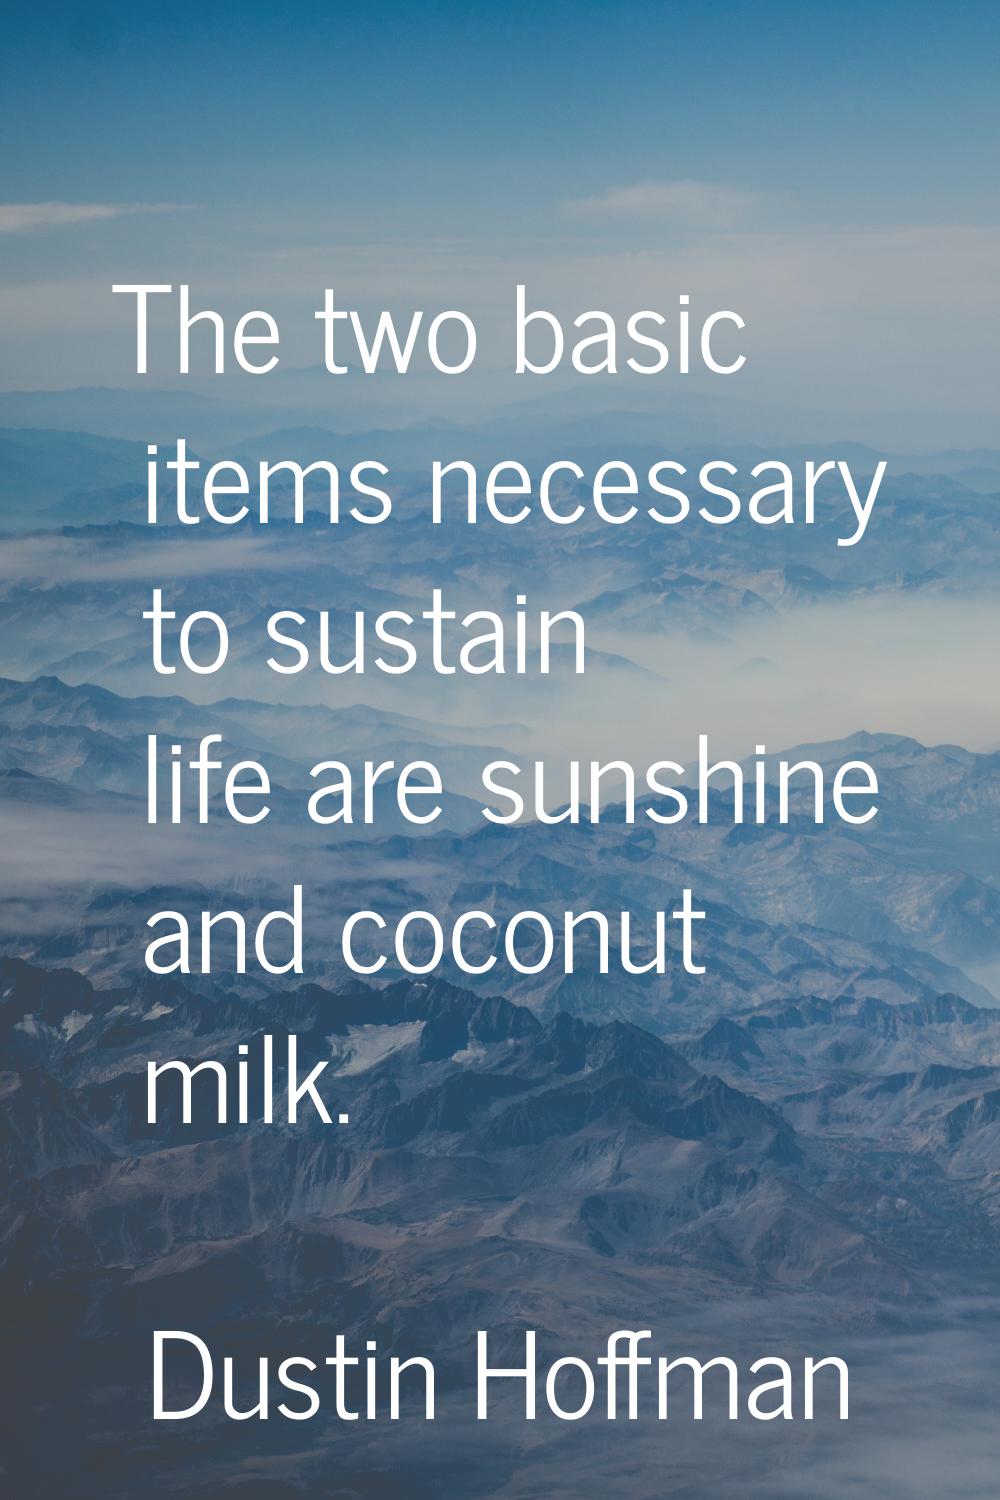 The two basic items necessary to sustain life are sunshine and coconut milk.